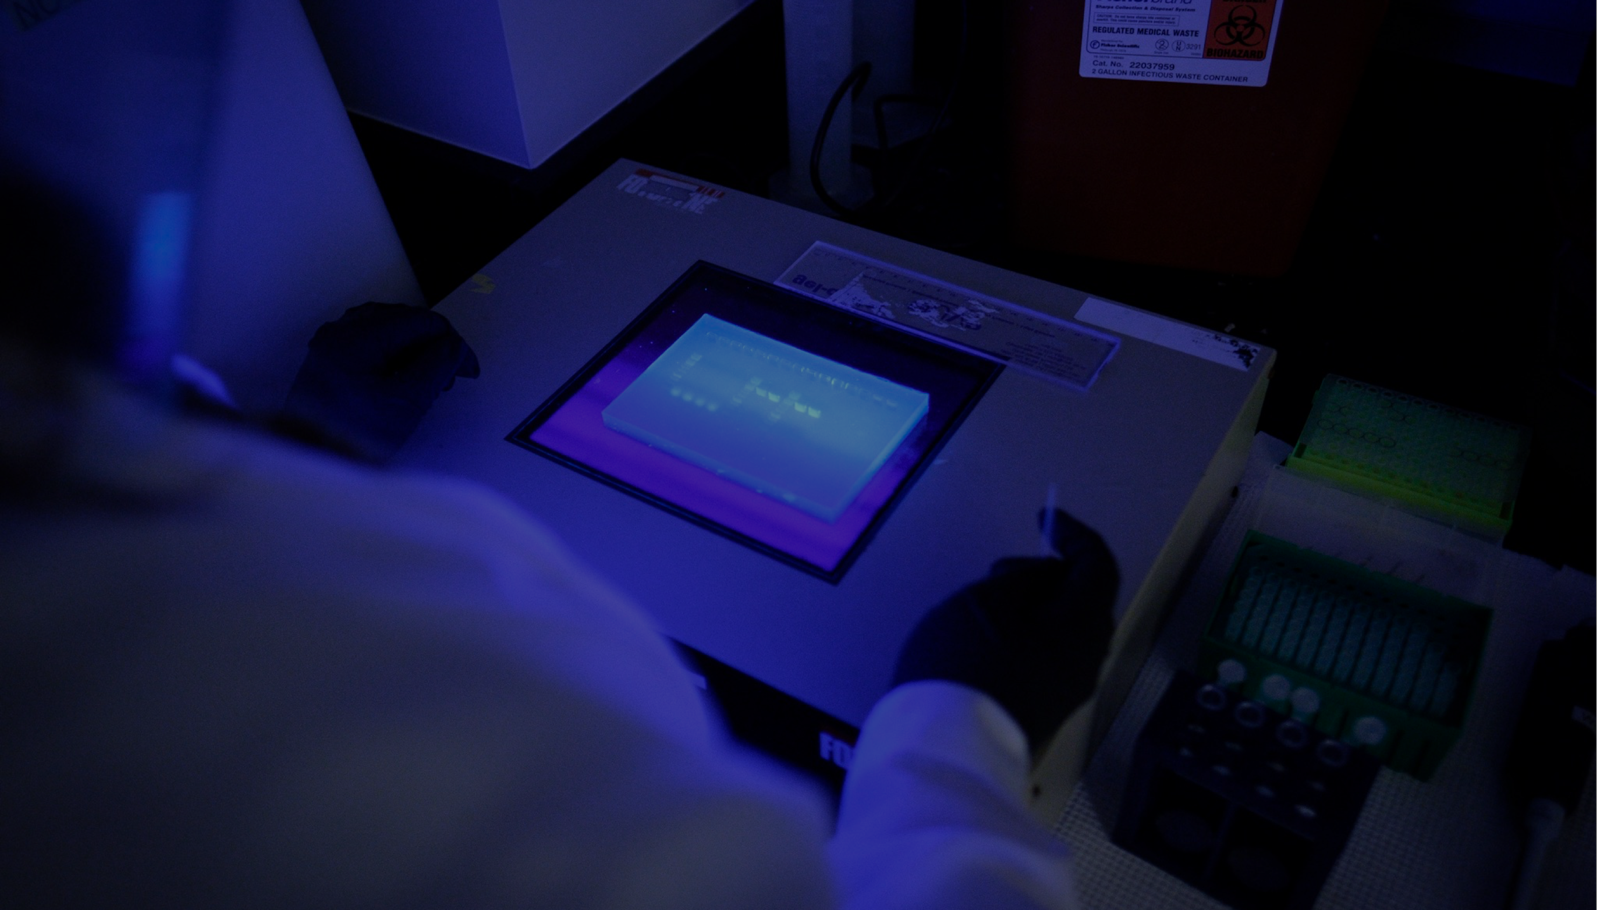 A lab technician works with equipment in a darkly lit room.